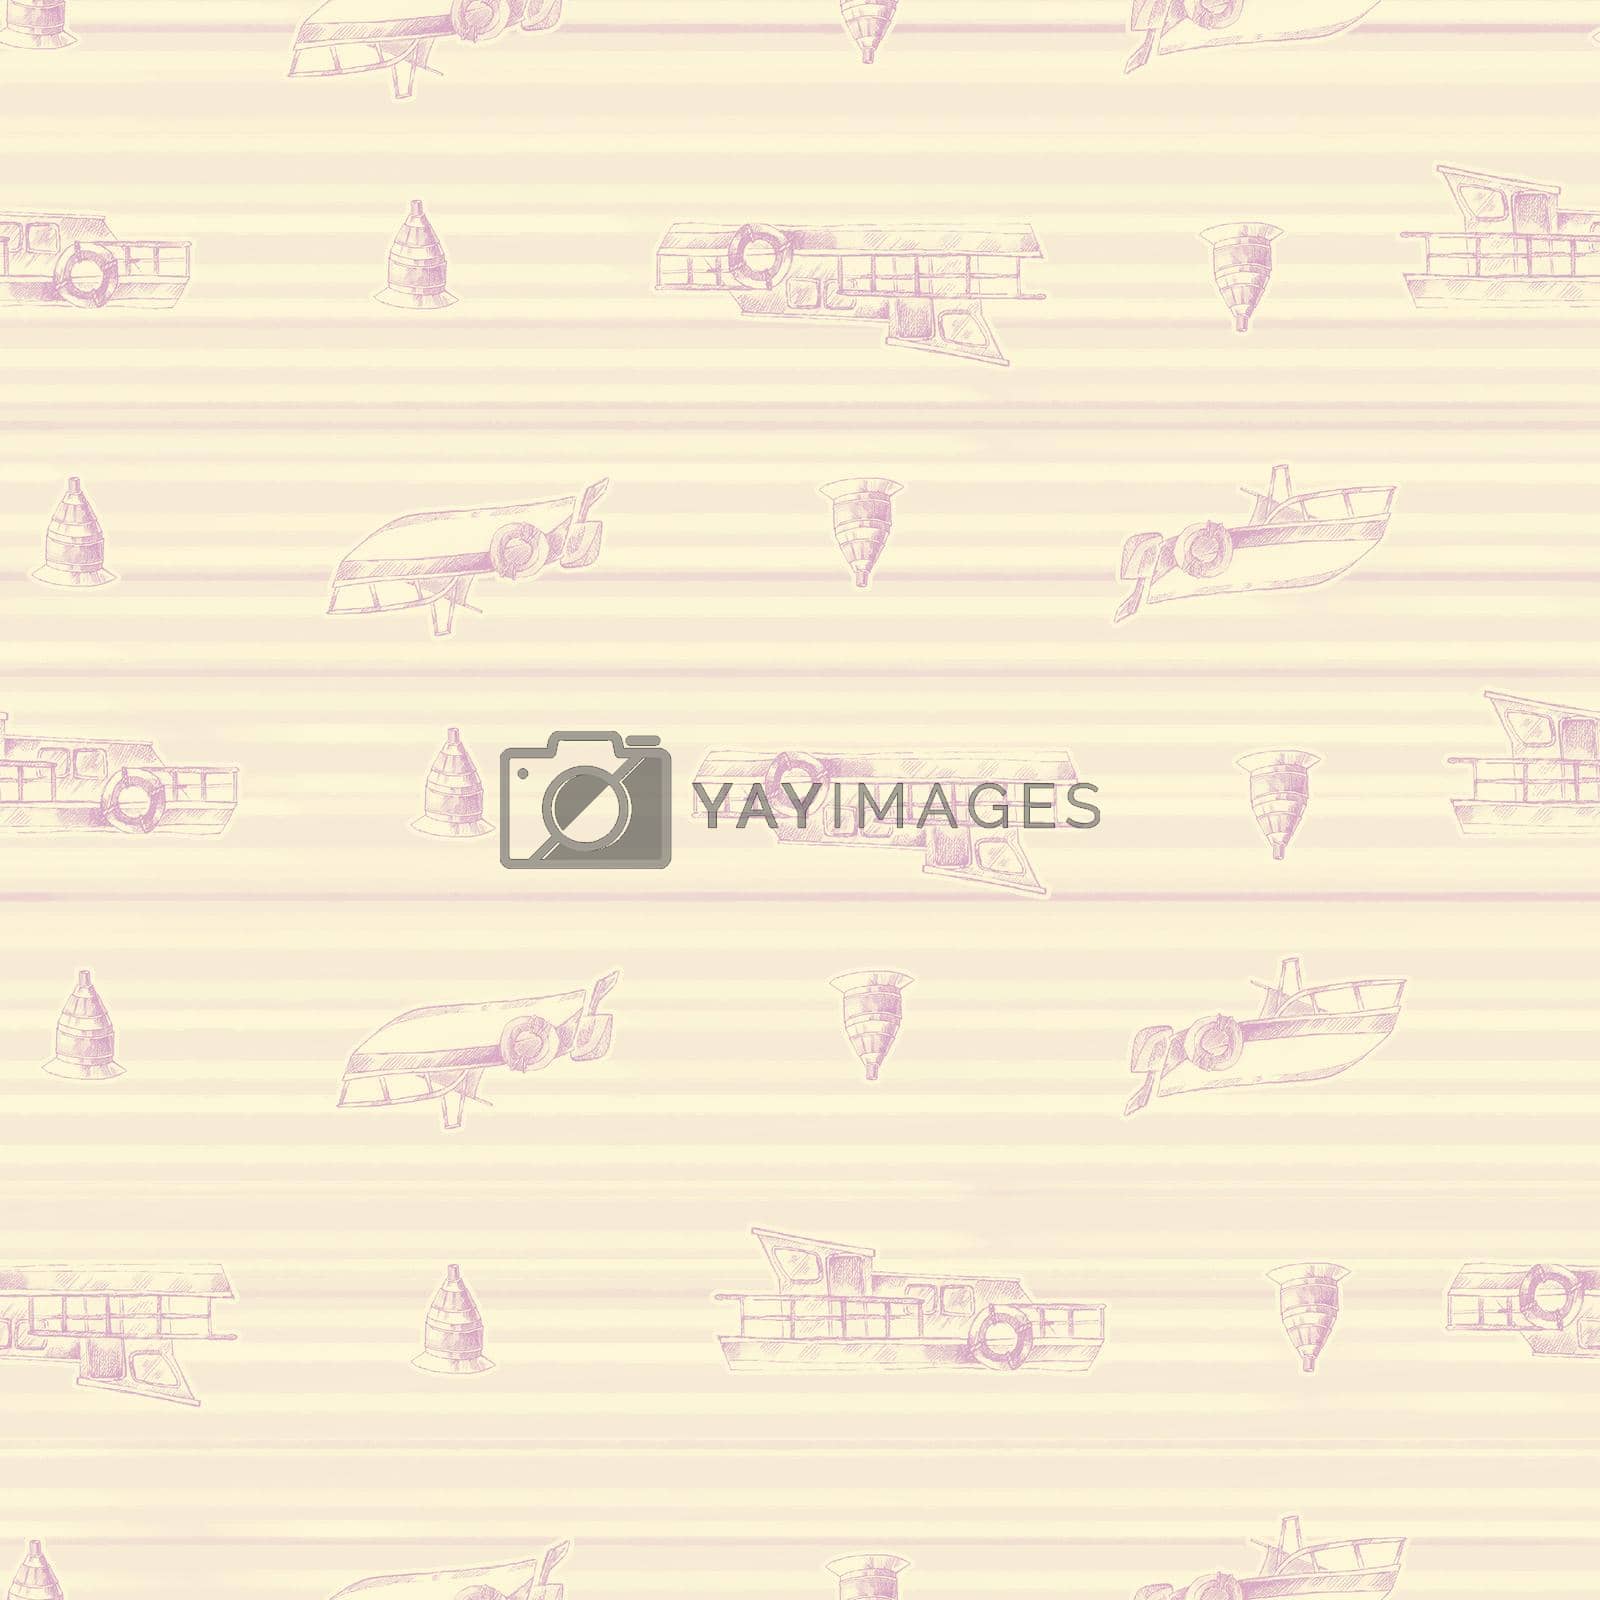 Royalty free image of Sailboats with stripes hand drawn seamless pattern in nautical style by fireFLYart